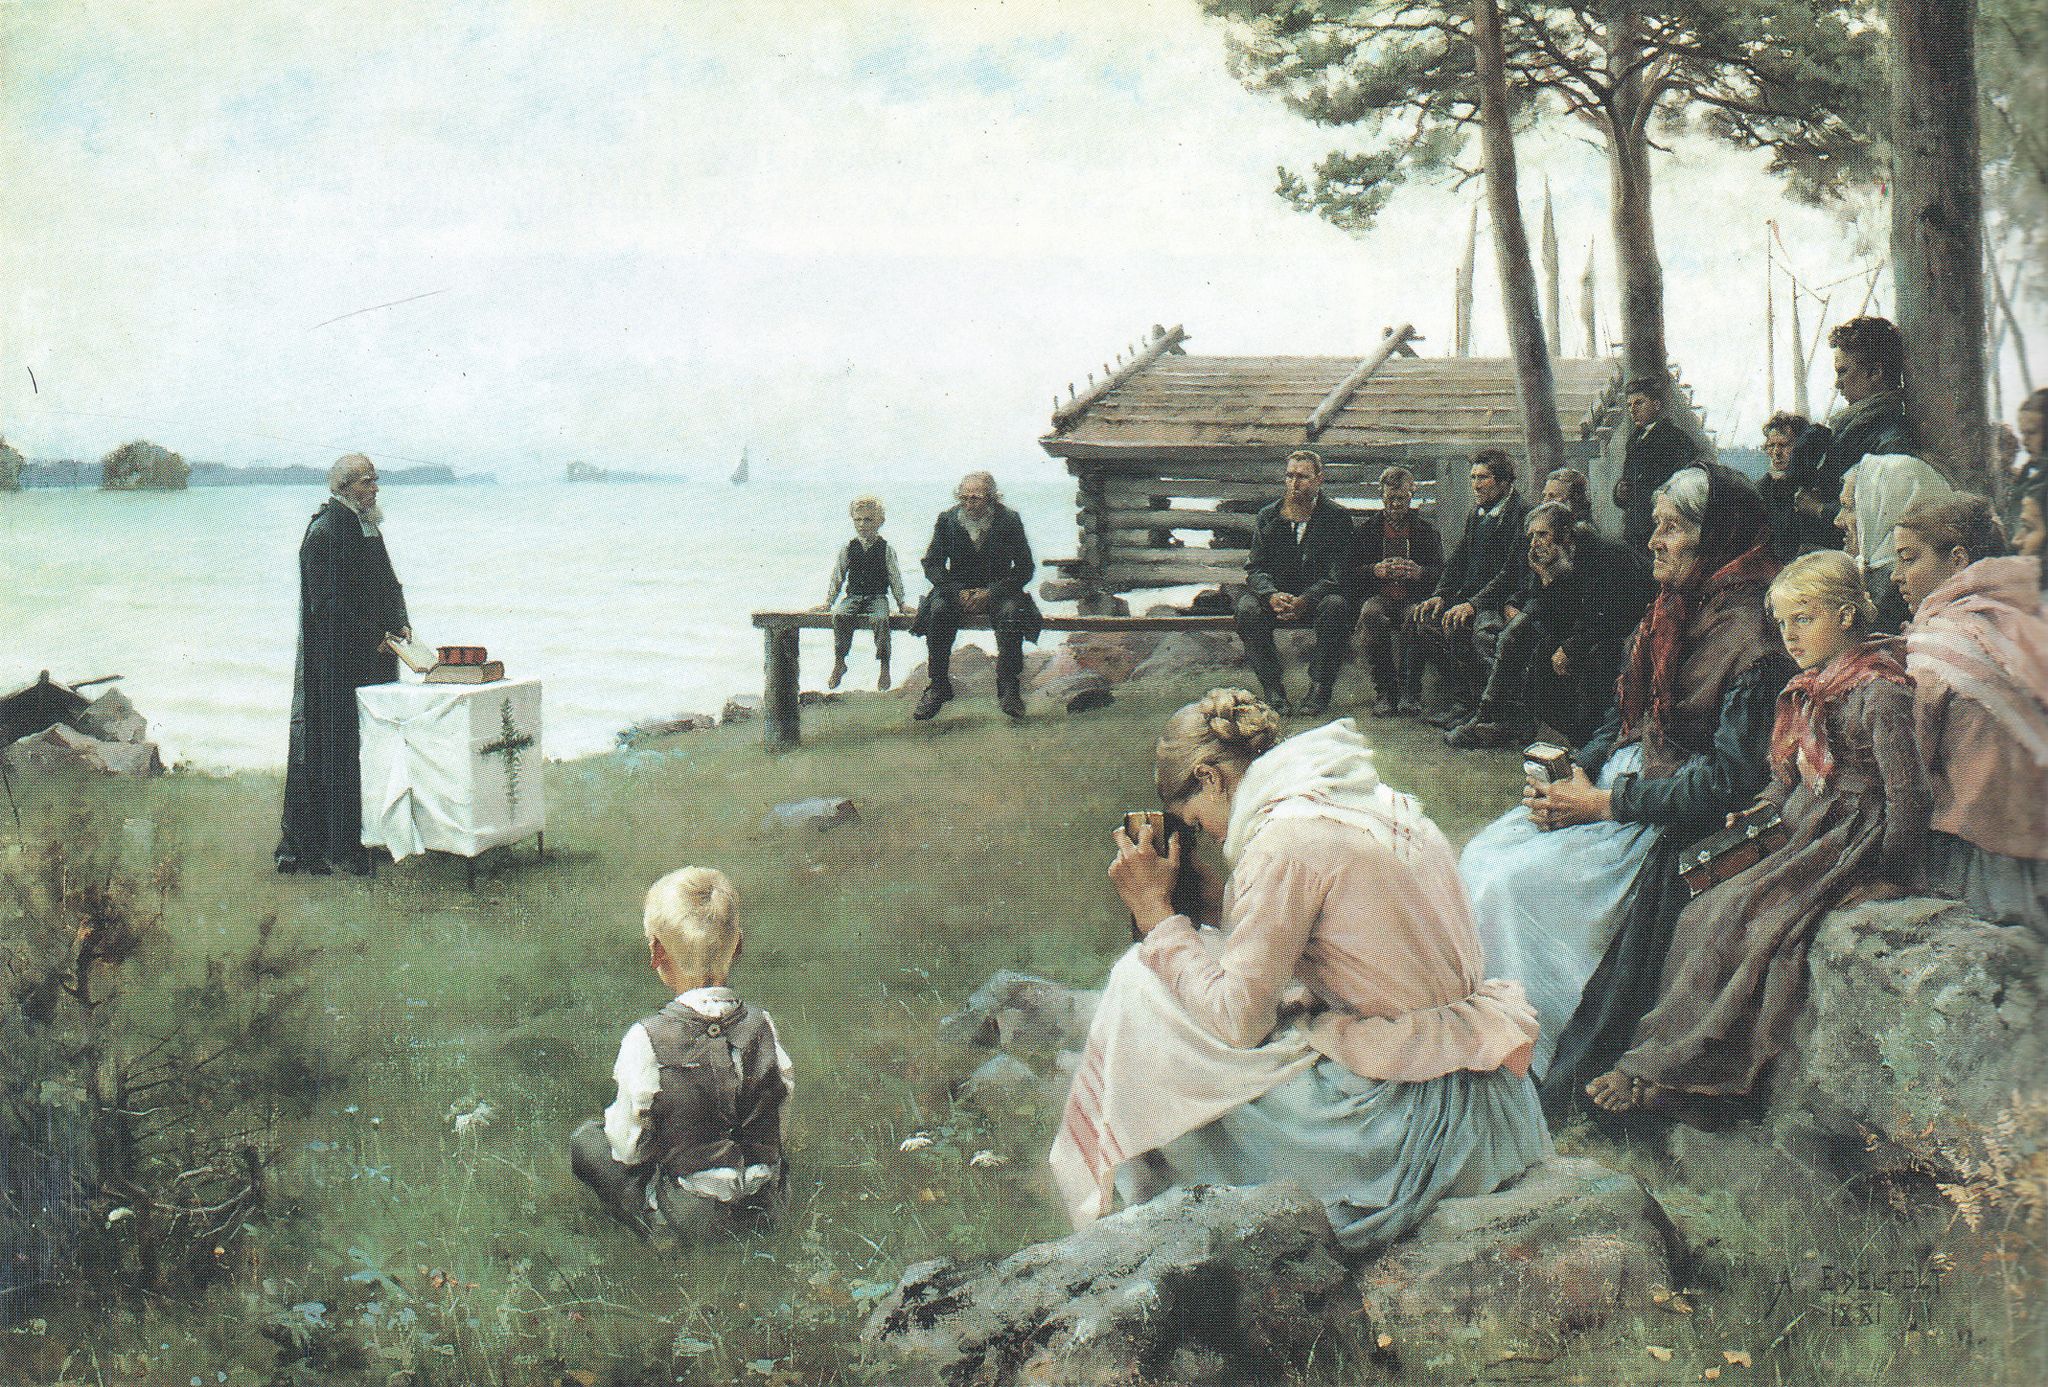 Service in the Southern Archipelago